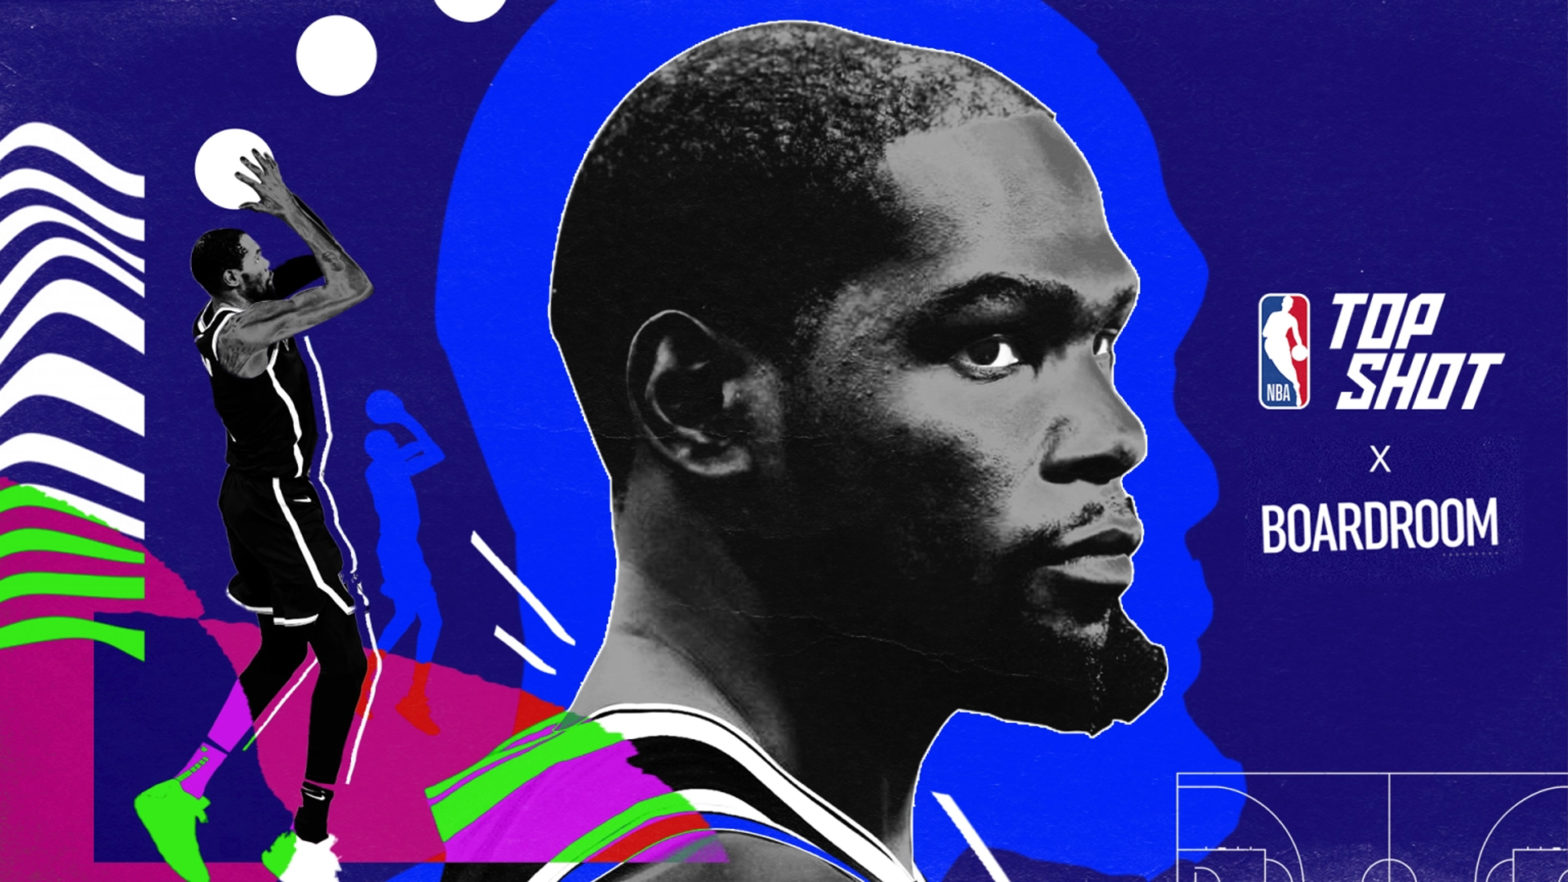 Kevin Durant Inks Deal With Blockchain Platform Dapper Labs, Becomes The First Player To Back NBA Top Shot